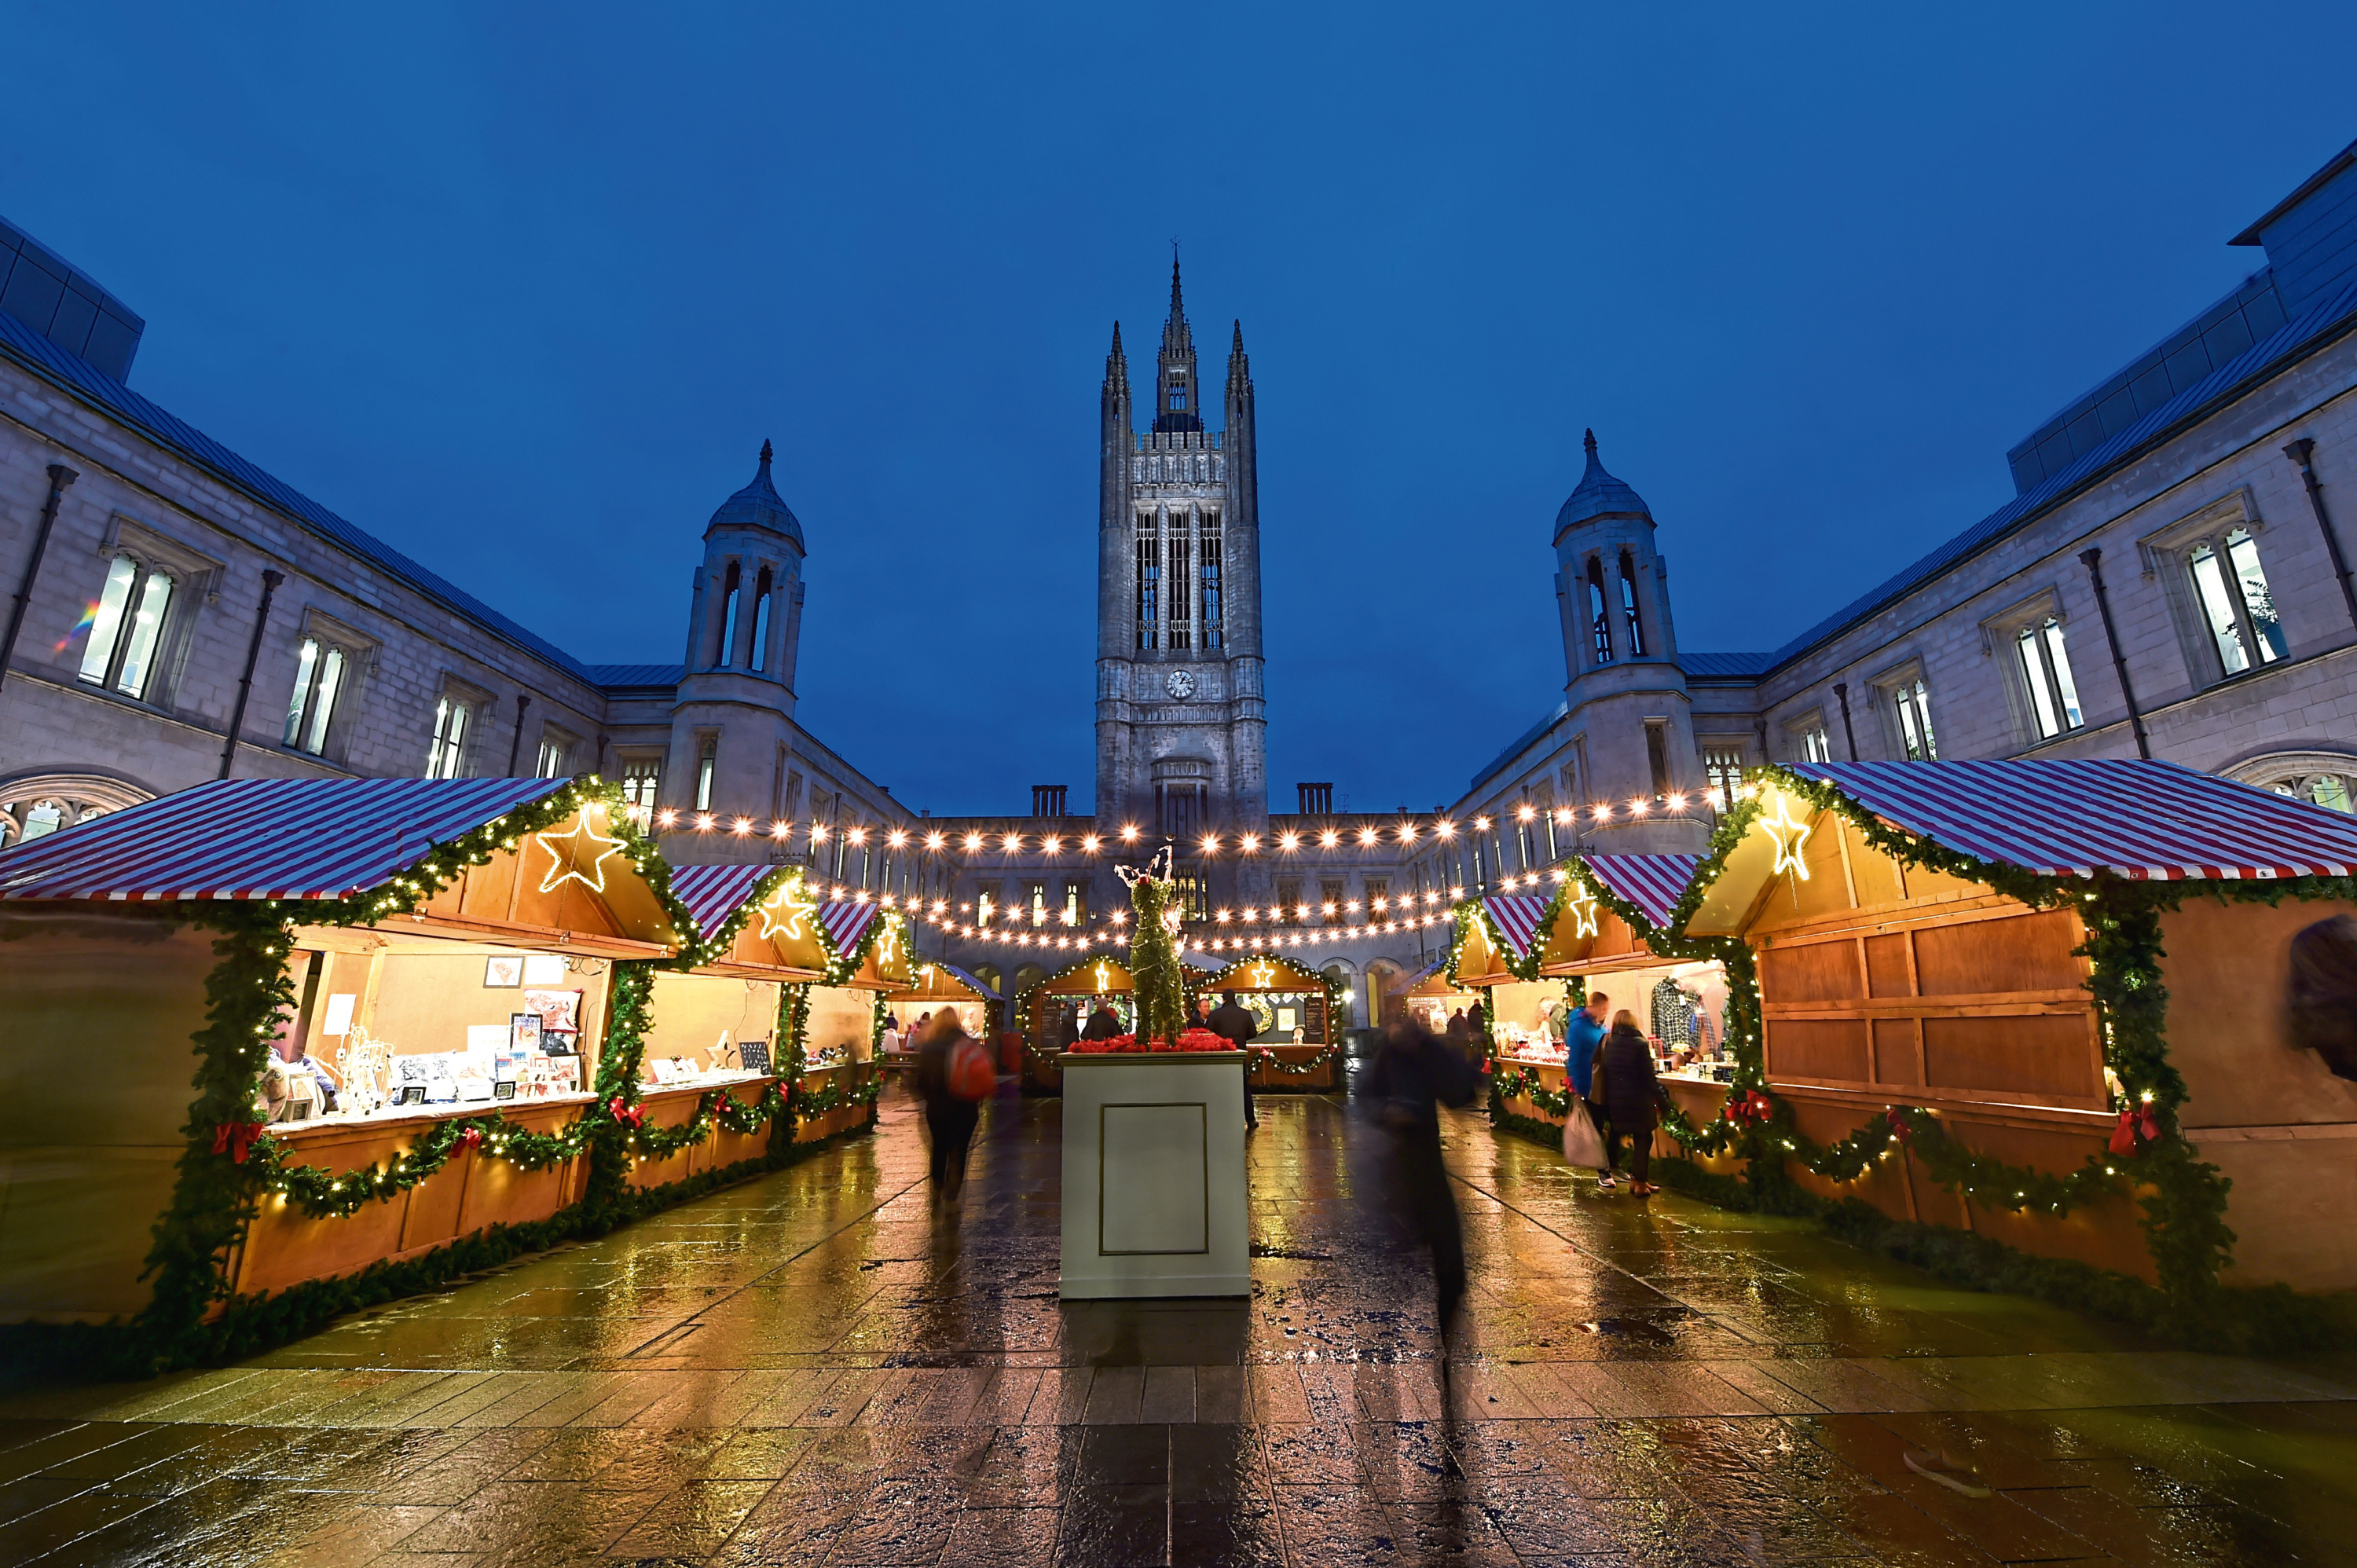 A view of the Christmas Village and Market at Marischal Square
Picture by Kenny Elrick